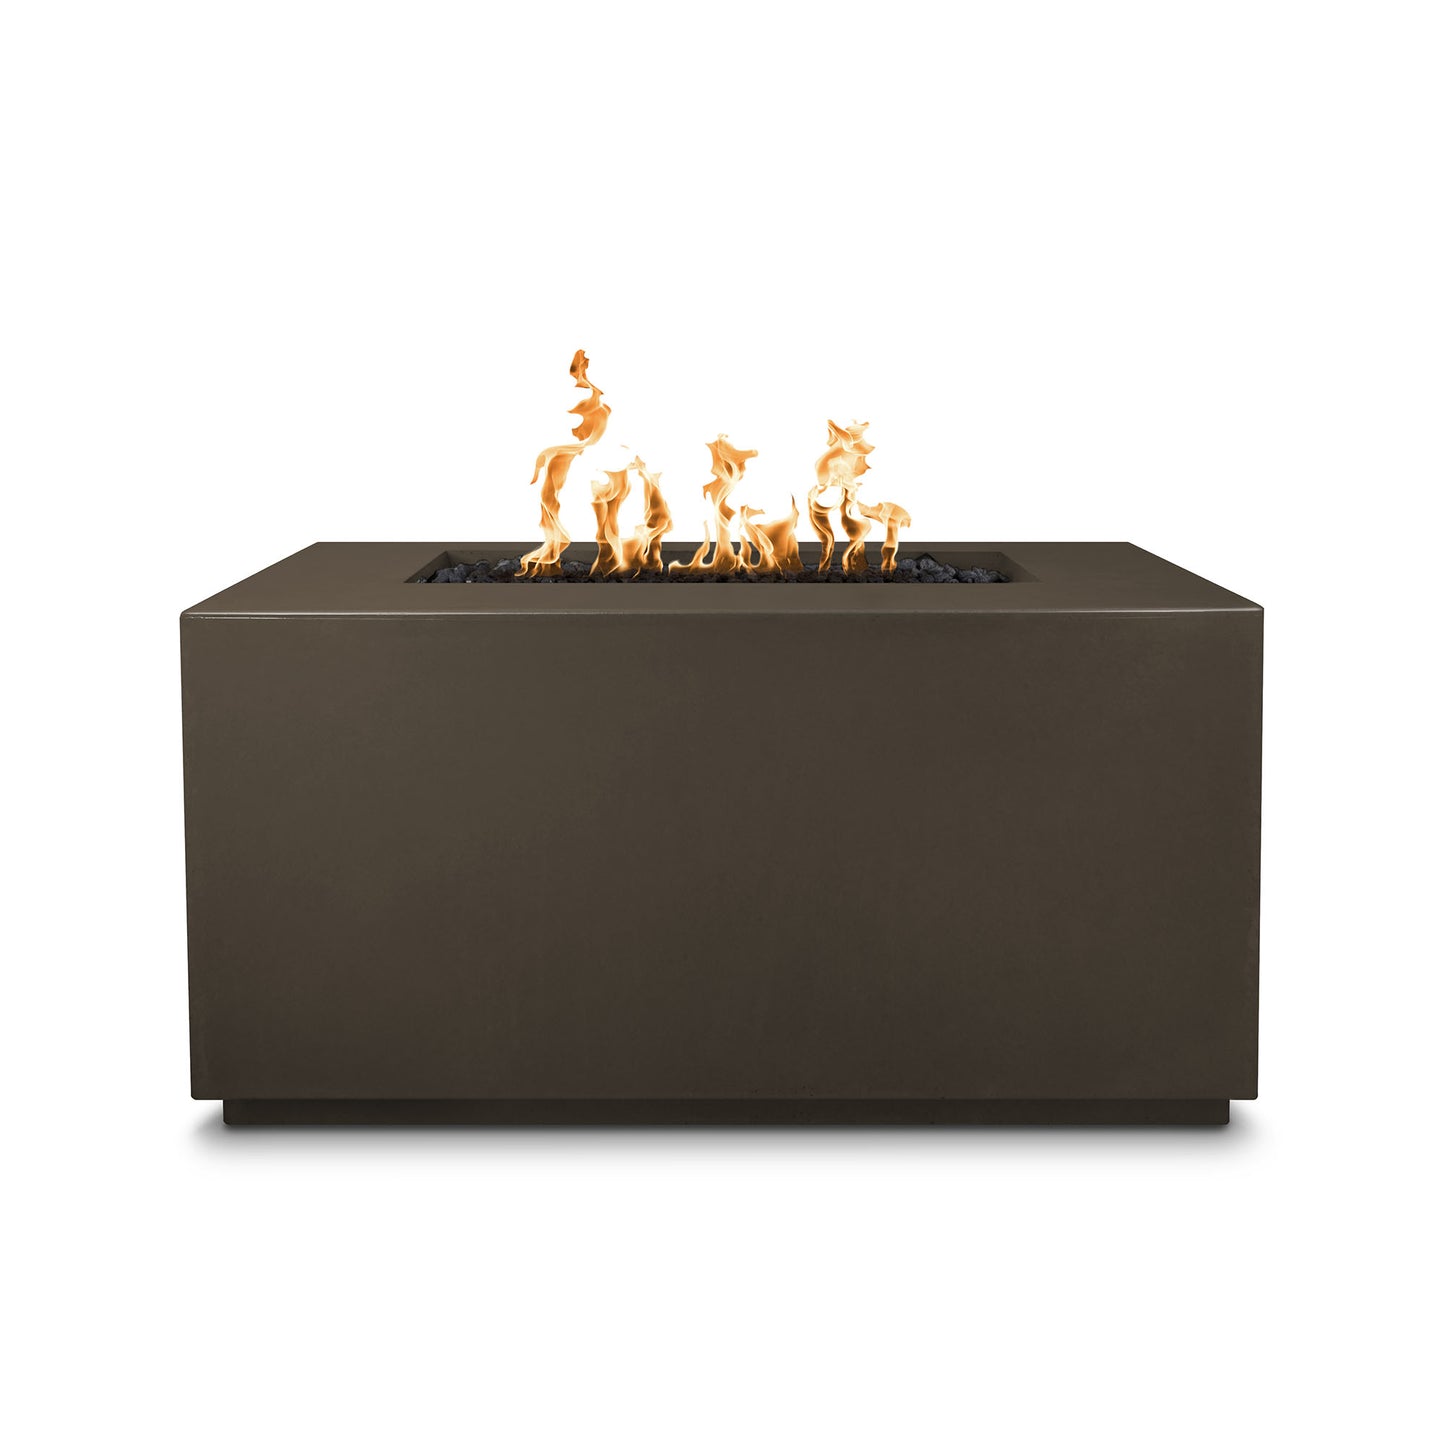 Pismo Concrete Fire Pit 60" - Electronic Ignition